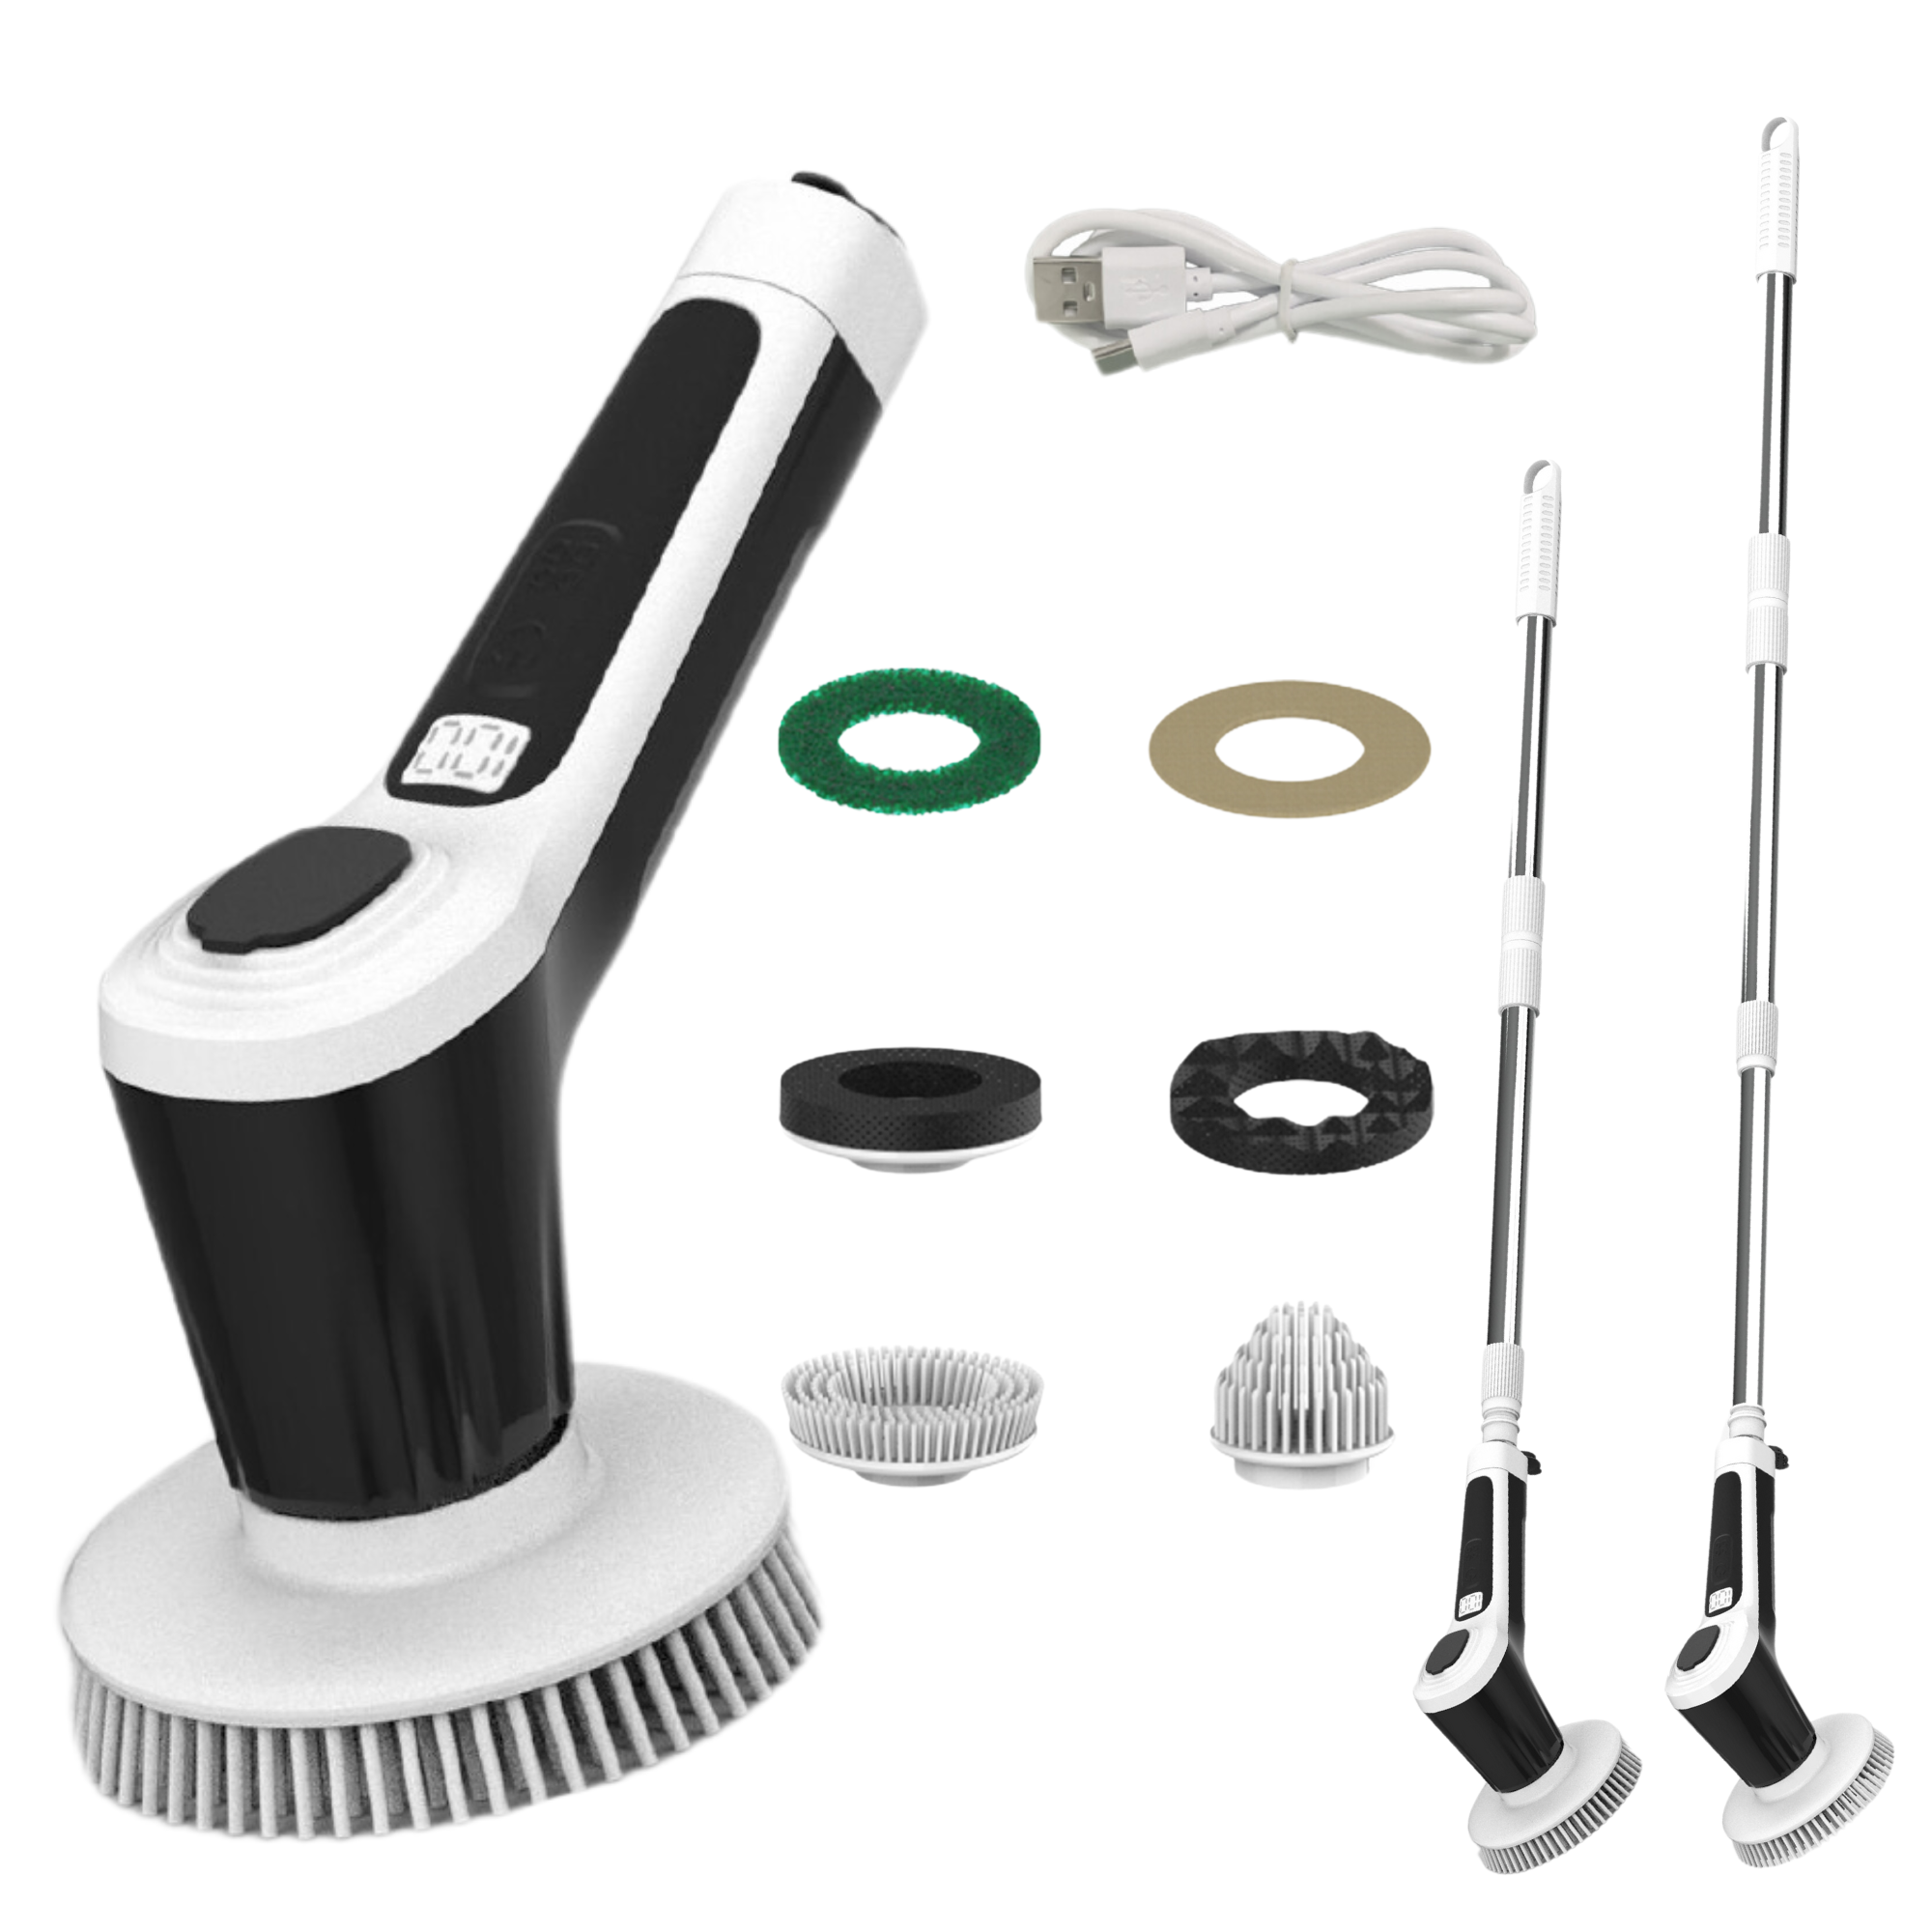 Achaté Electric Cleaning Brush